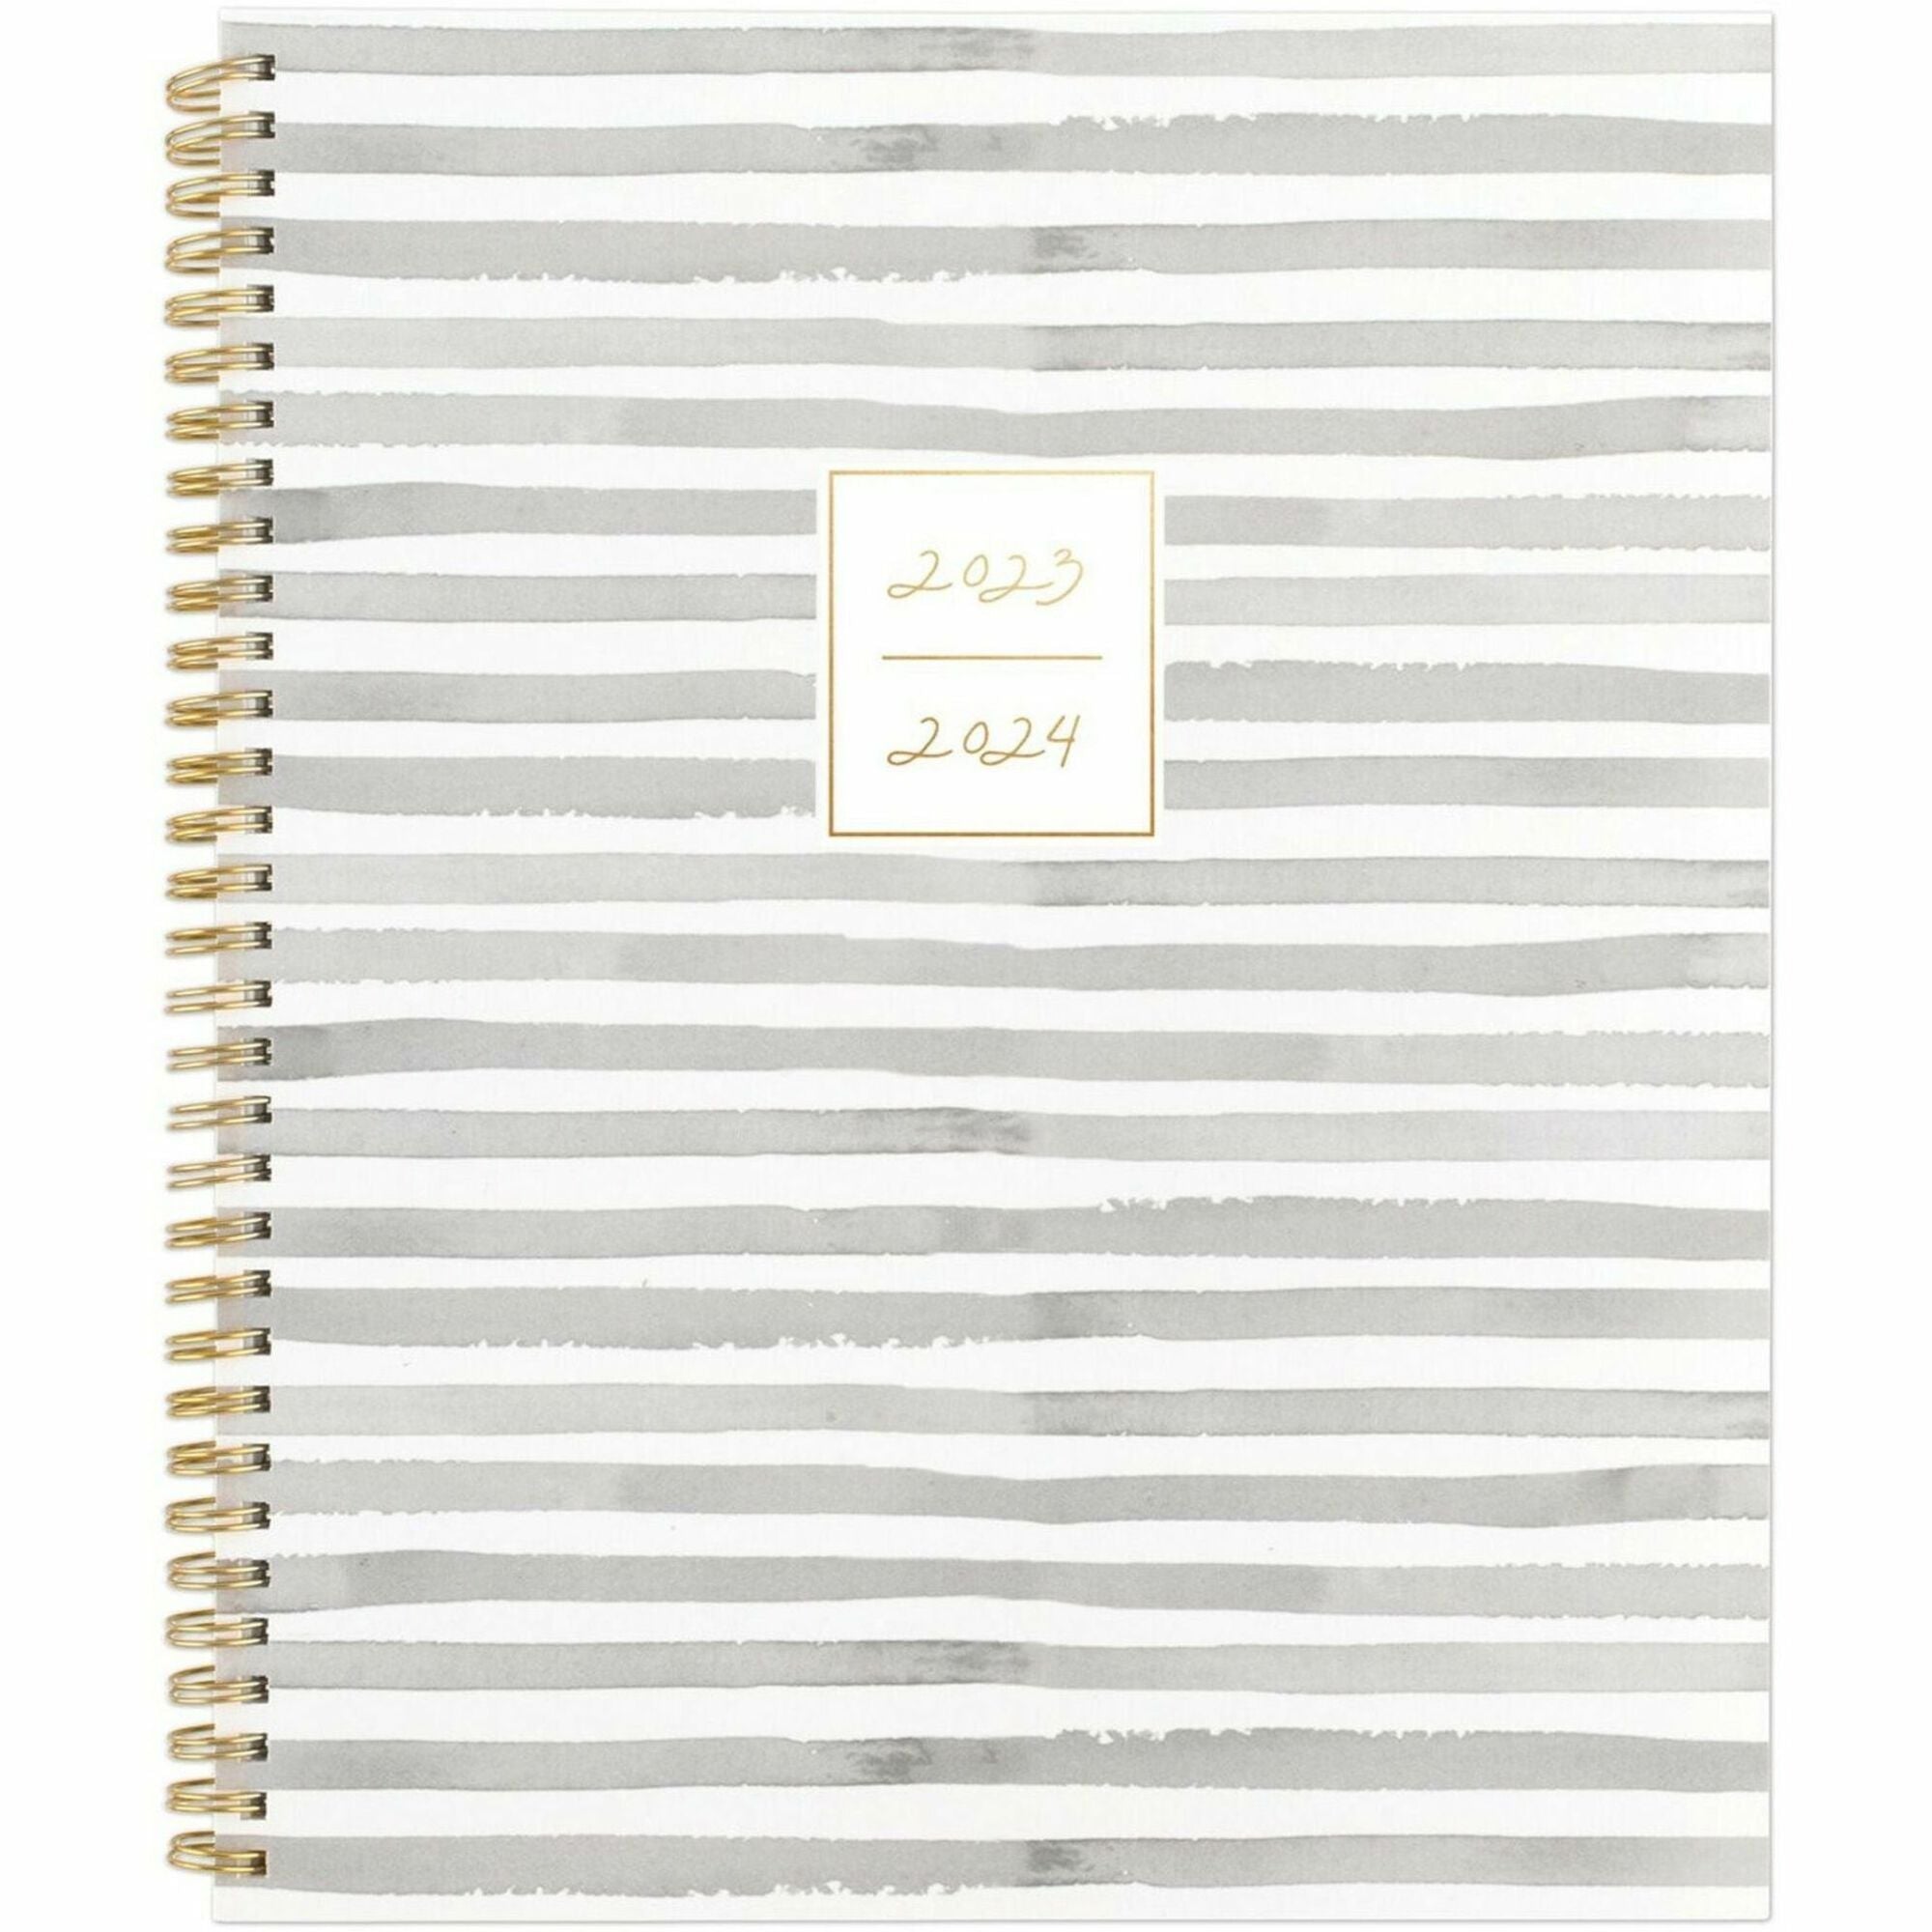 Cambridge Leah Bisch Academic Planner - Large Size - Academic - Weekly, Monthly - 12 Month - July 2023 - June 2024 - 1 Week, 1 Month Double Page Layout - 8 1/2" x 11" Sheet Size - Twin Wire - Gray, White - Flexible Cover, Unruled Planning Space, Note - 1